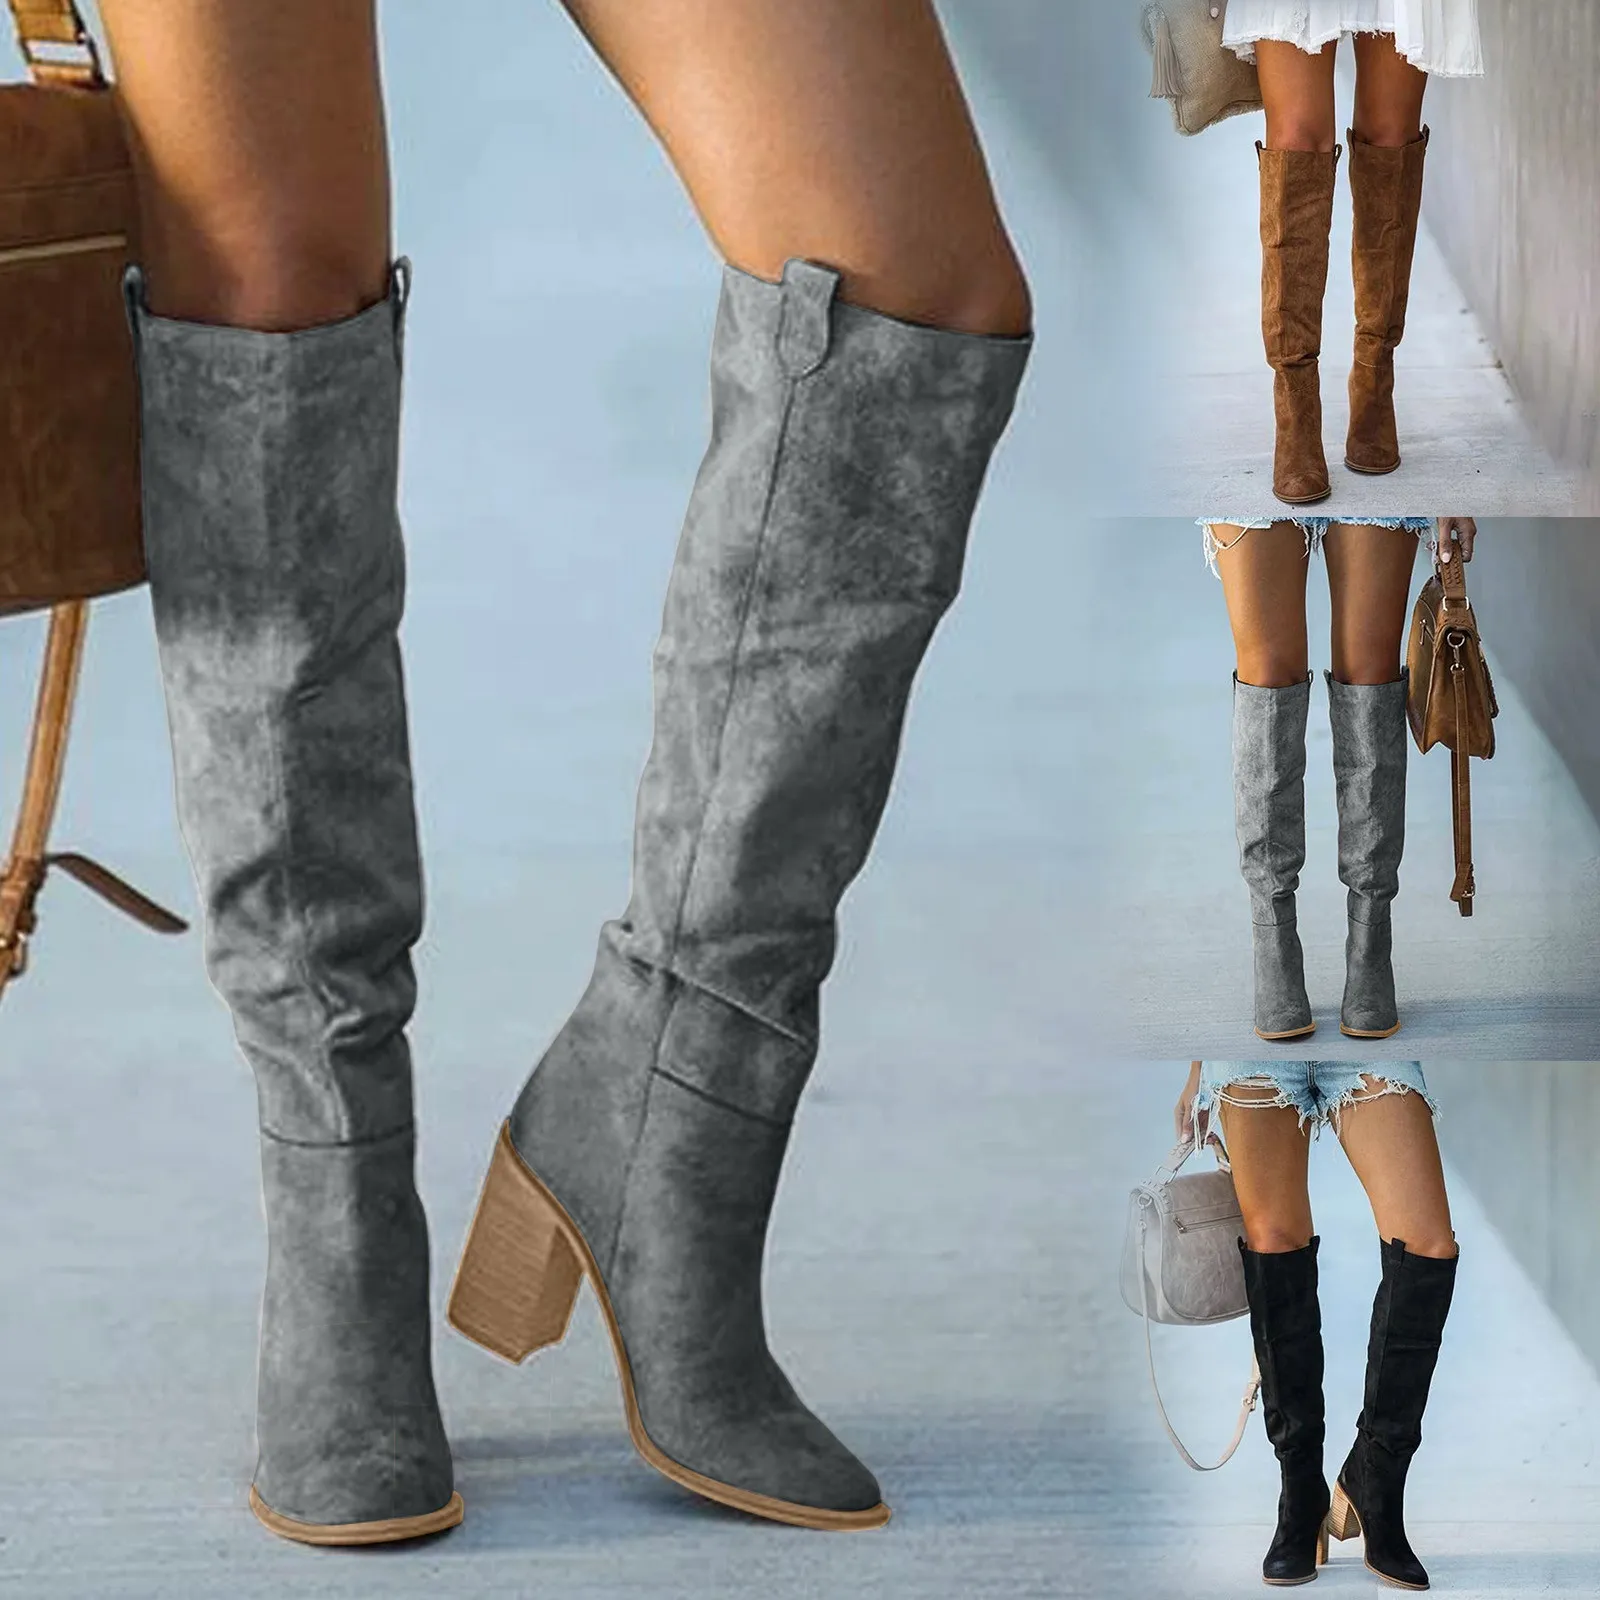 Women Long Boots Sexy High Heels Up Over The Knee Boots Autumn Winter Warm Shoes Female Slim Thigh High Boots Party For Girls Party Shoes 35-42